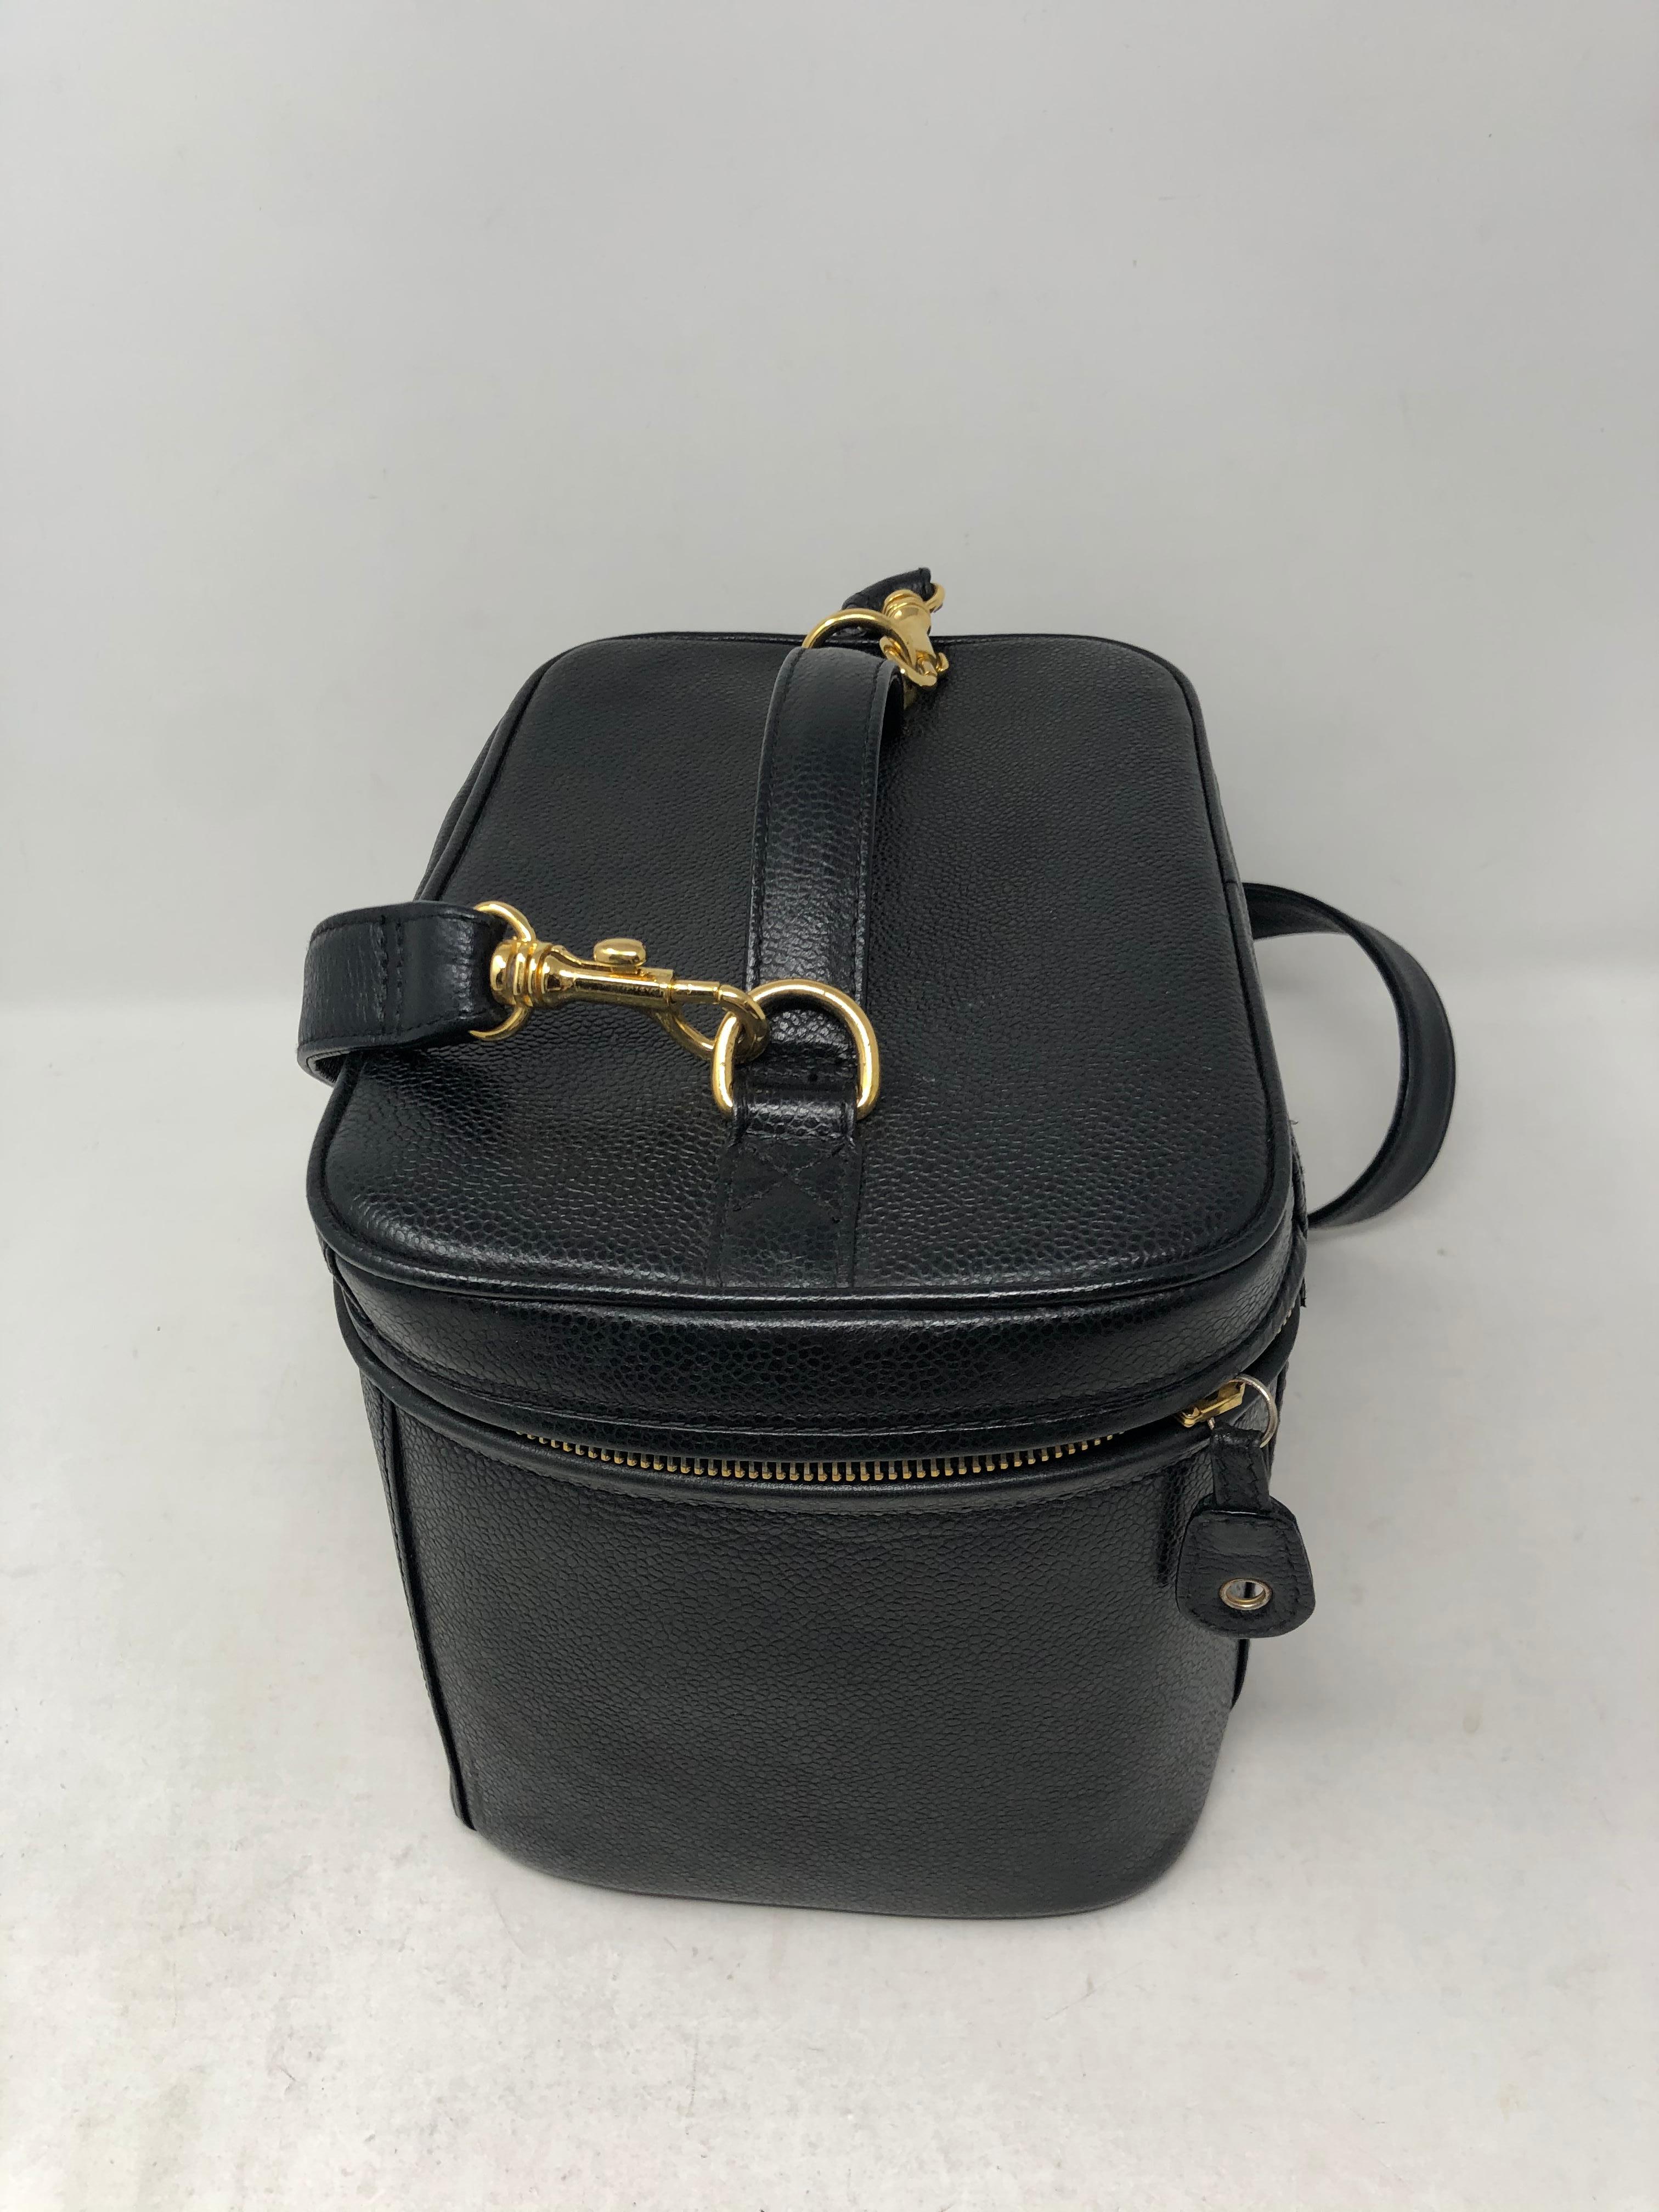 Black Chanel Vanity Case With Strap 